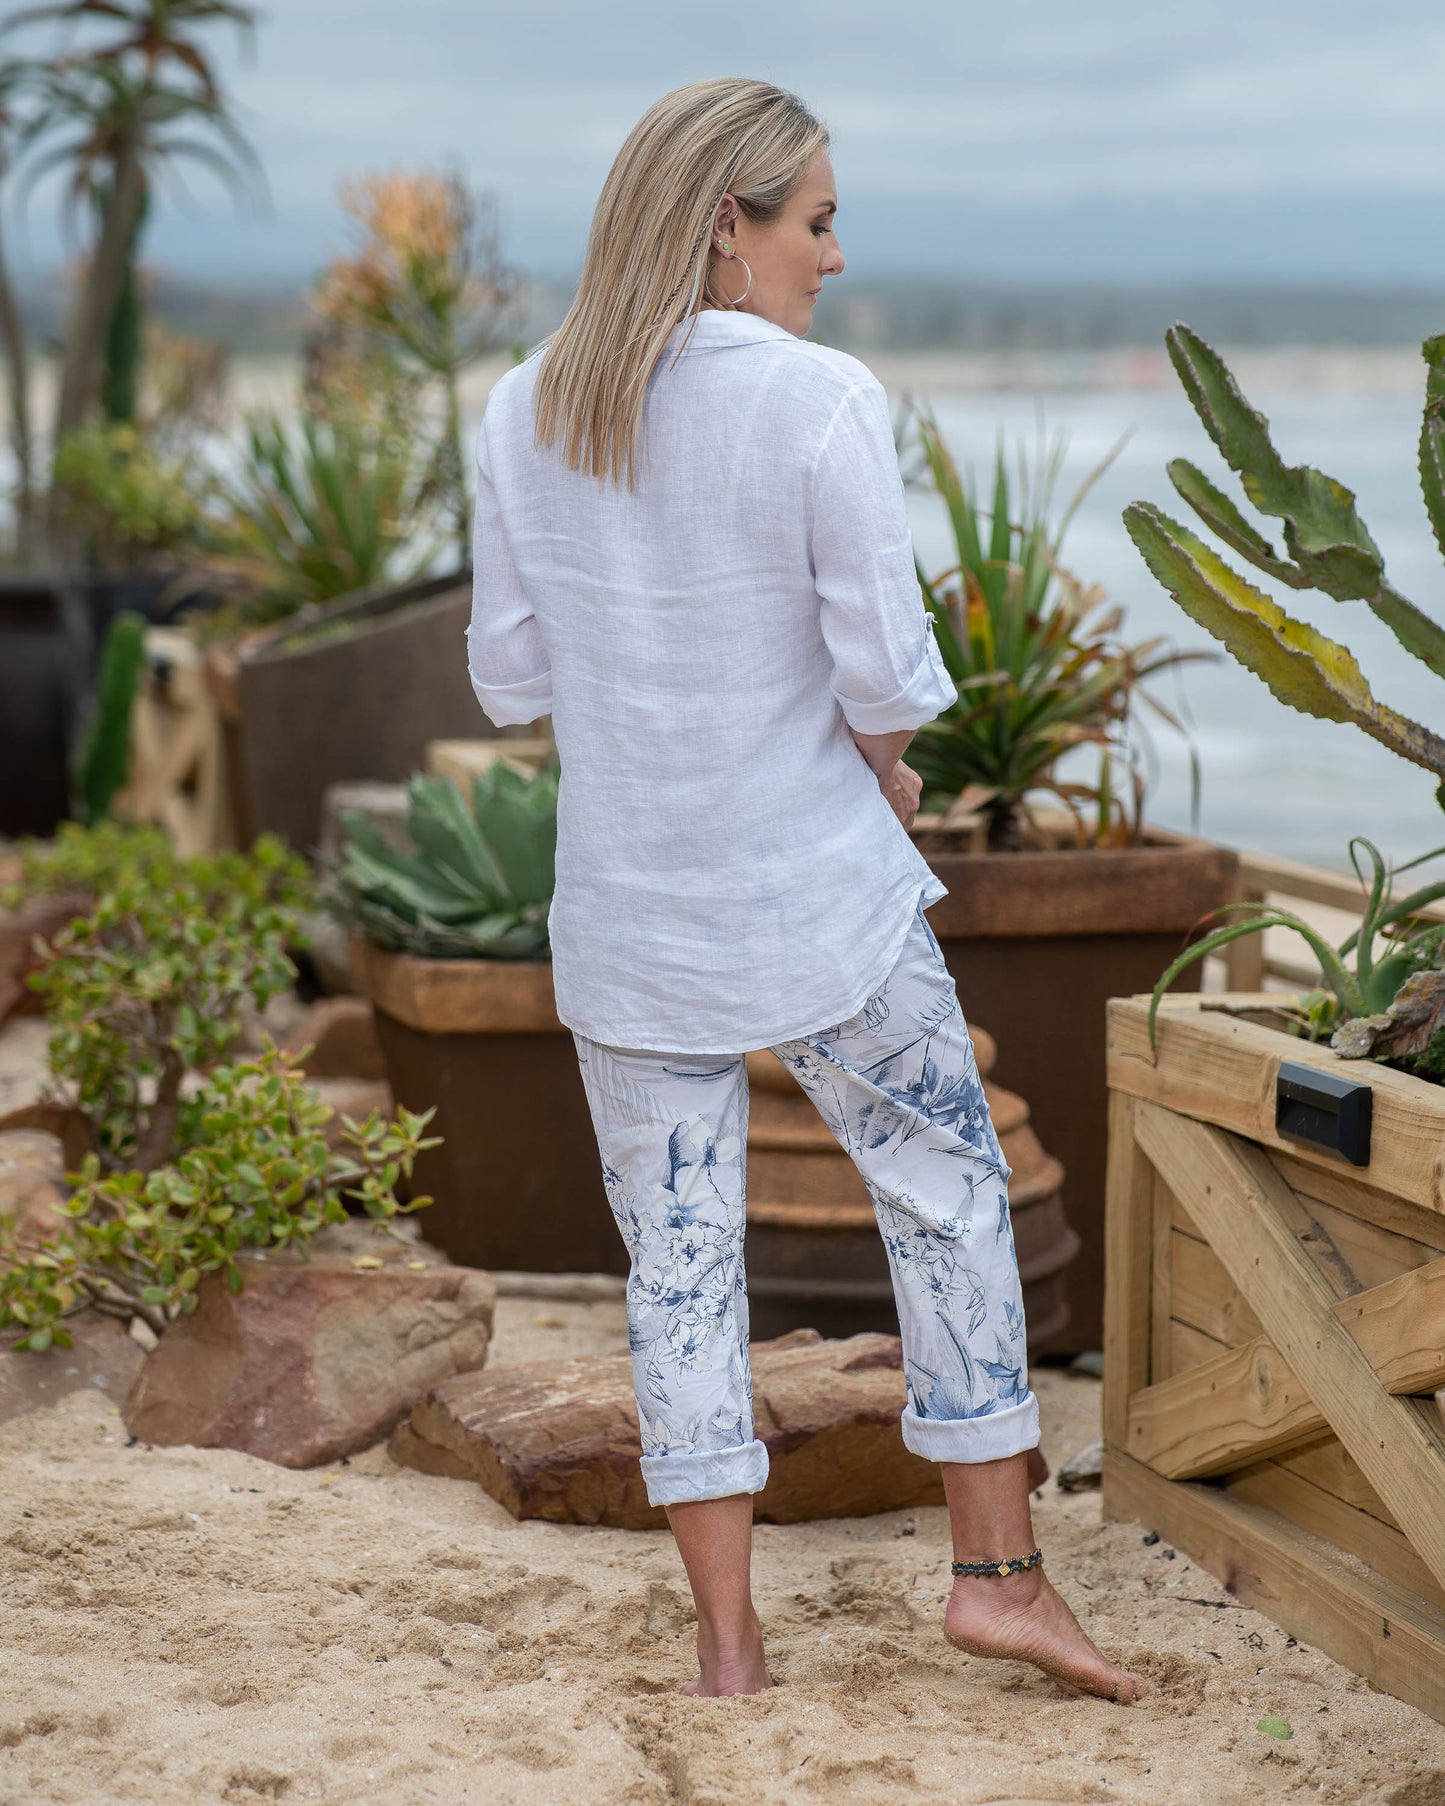 The 3/4 sleeves strike the perfect balance between coverage and breathability, making this top ideal for transitioning between seasons. Decorative front pocket that adds a subtle yet distinctive element to the design. Beautiful round cut hem adds a feminine touch